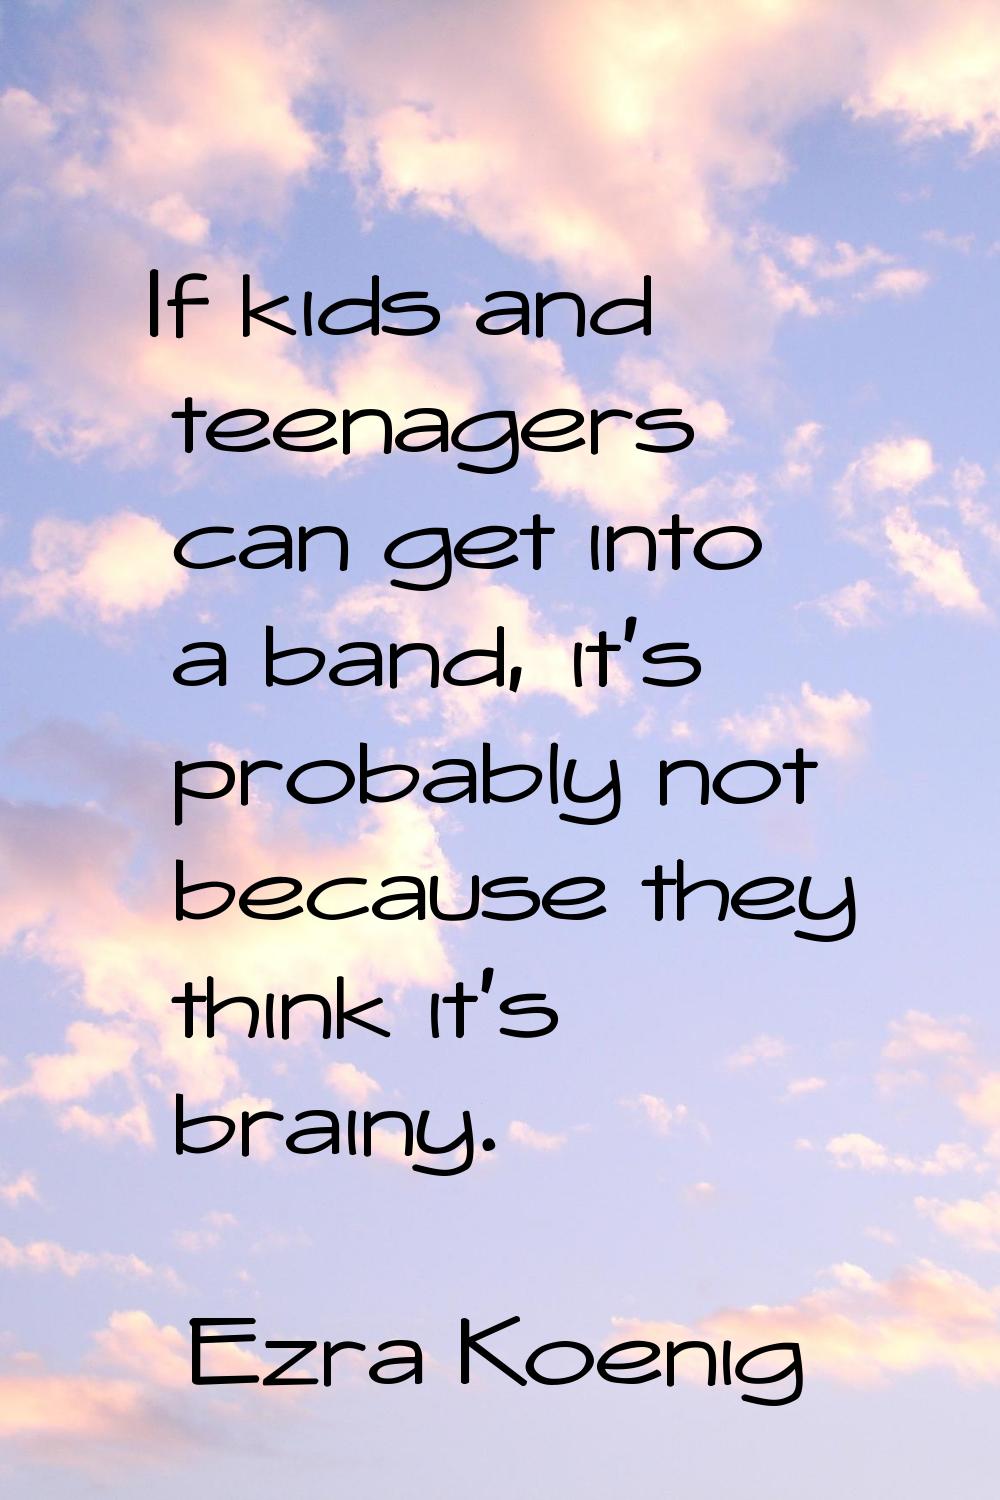 If kids and teenagers can get into a band, it's probably not because they think it's brainy.